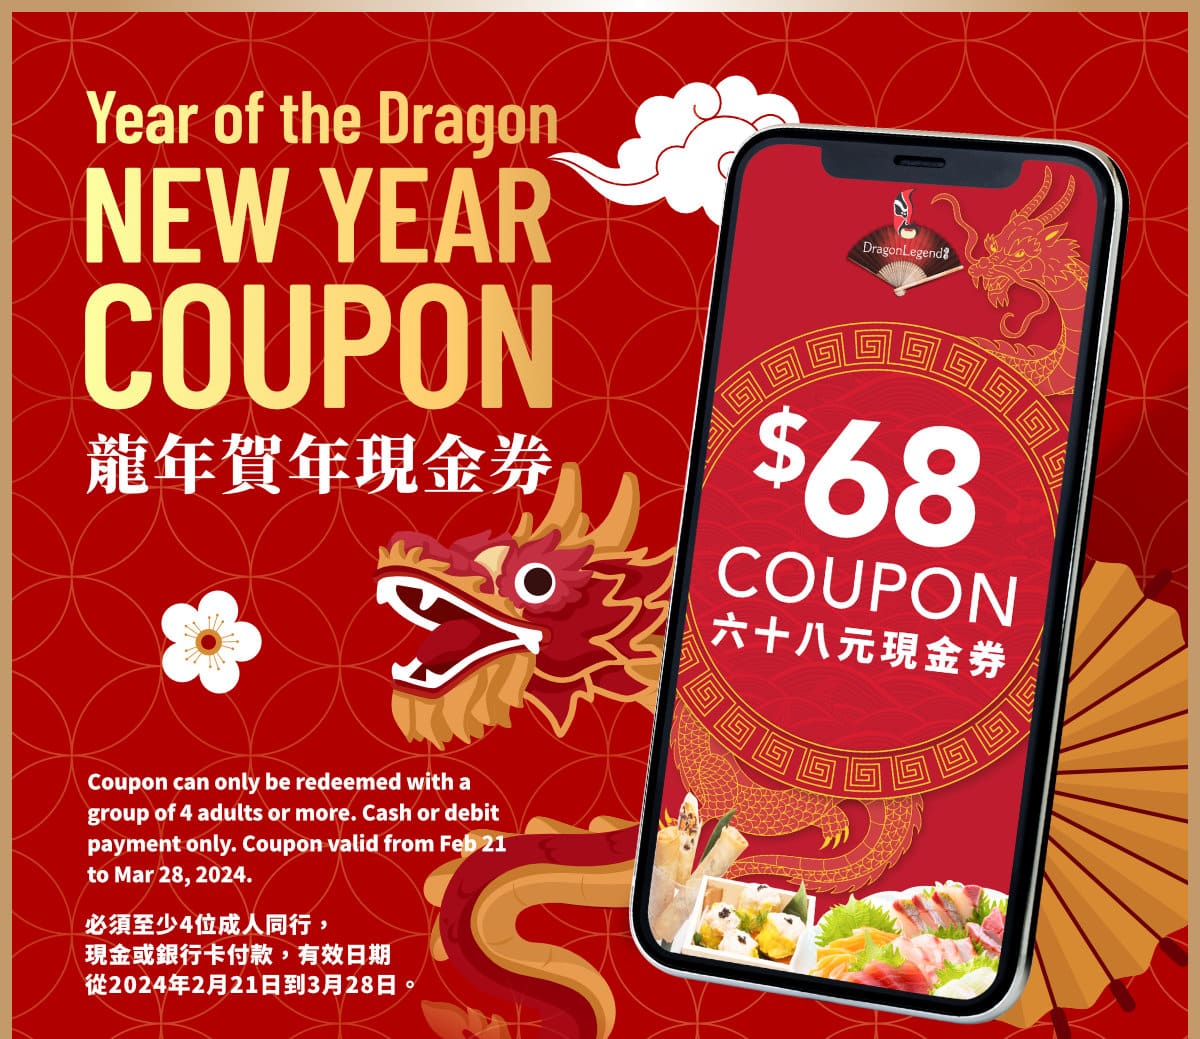 Celebrate Lunar New Year with a $68 Surprise Inside!Coupon can only be redeemed with a group of 4 adults or more. Cash or debit payment only. Coupon valid from Feb 21 to Mar 28, 2024.